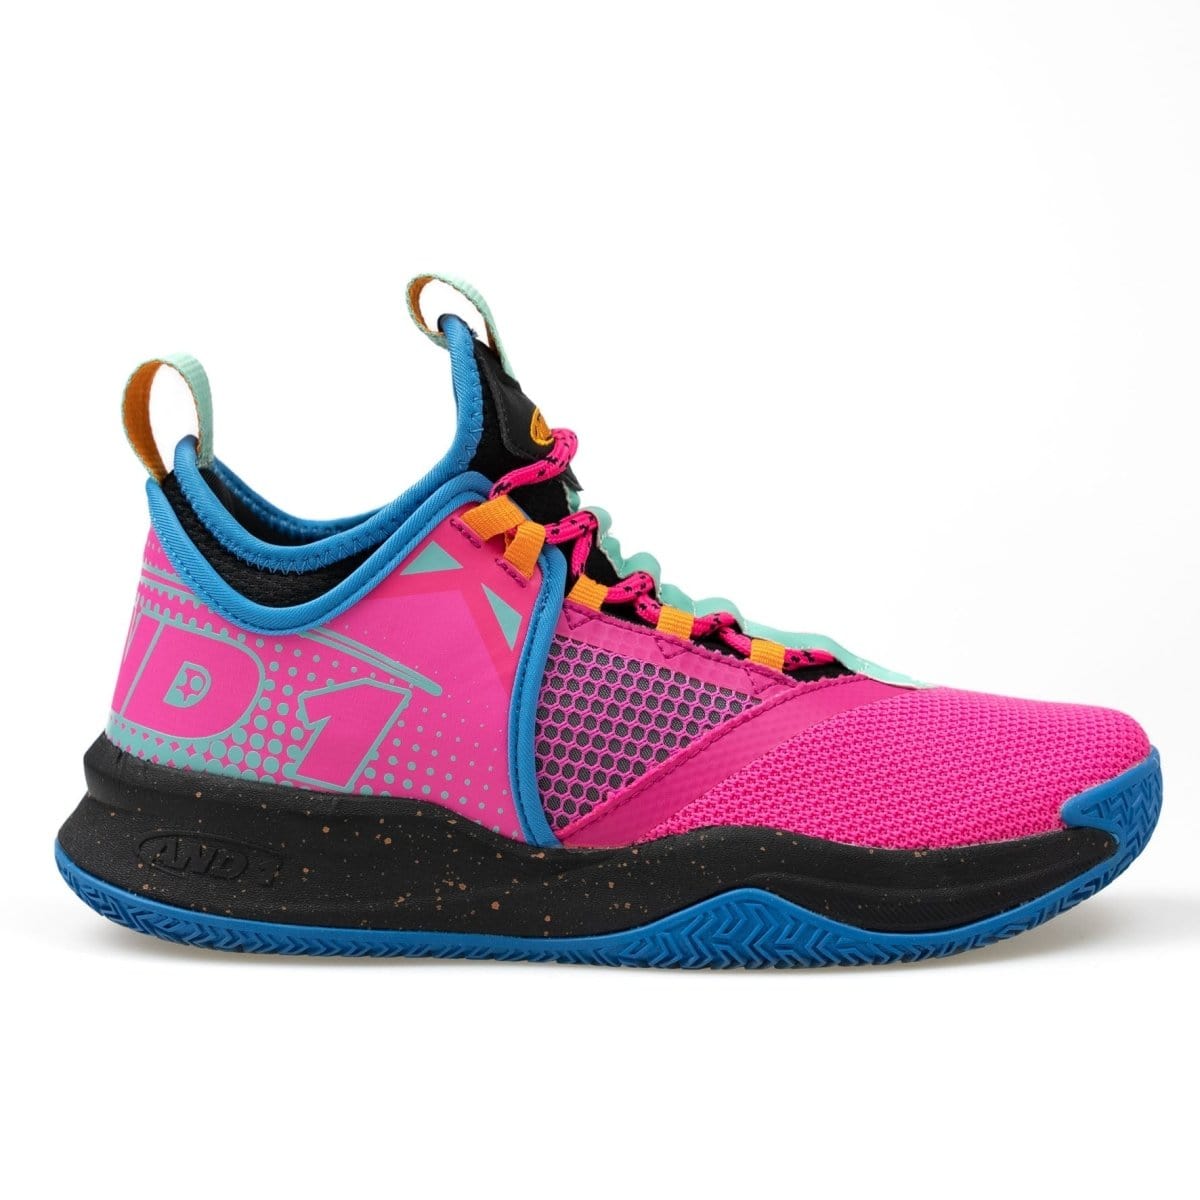 AND-1 AND-1 JUNIOR CHARGE PINK BASKETBALL SHOES - INSPORT